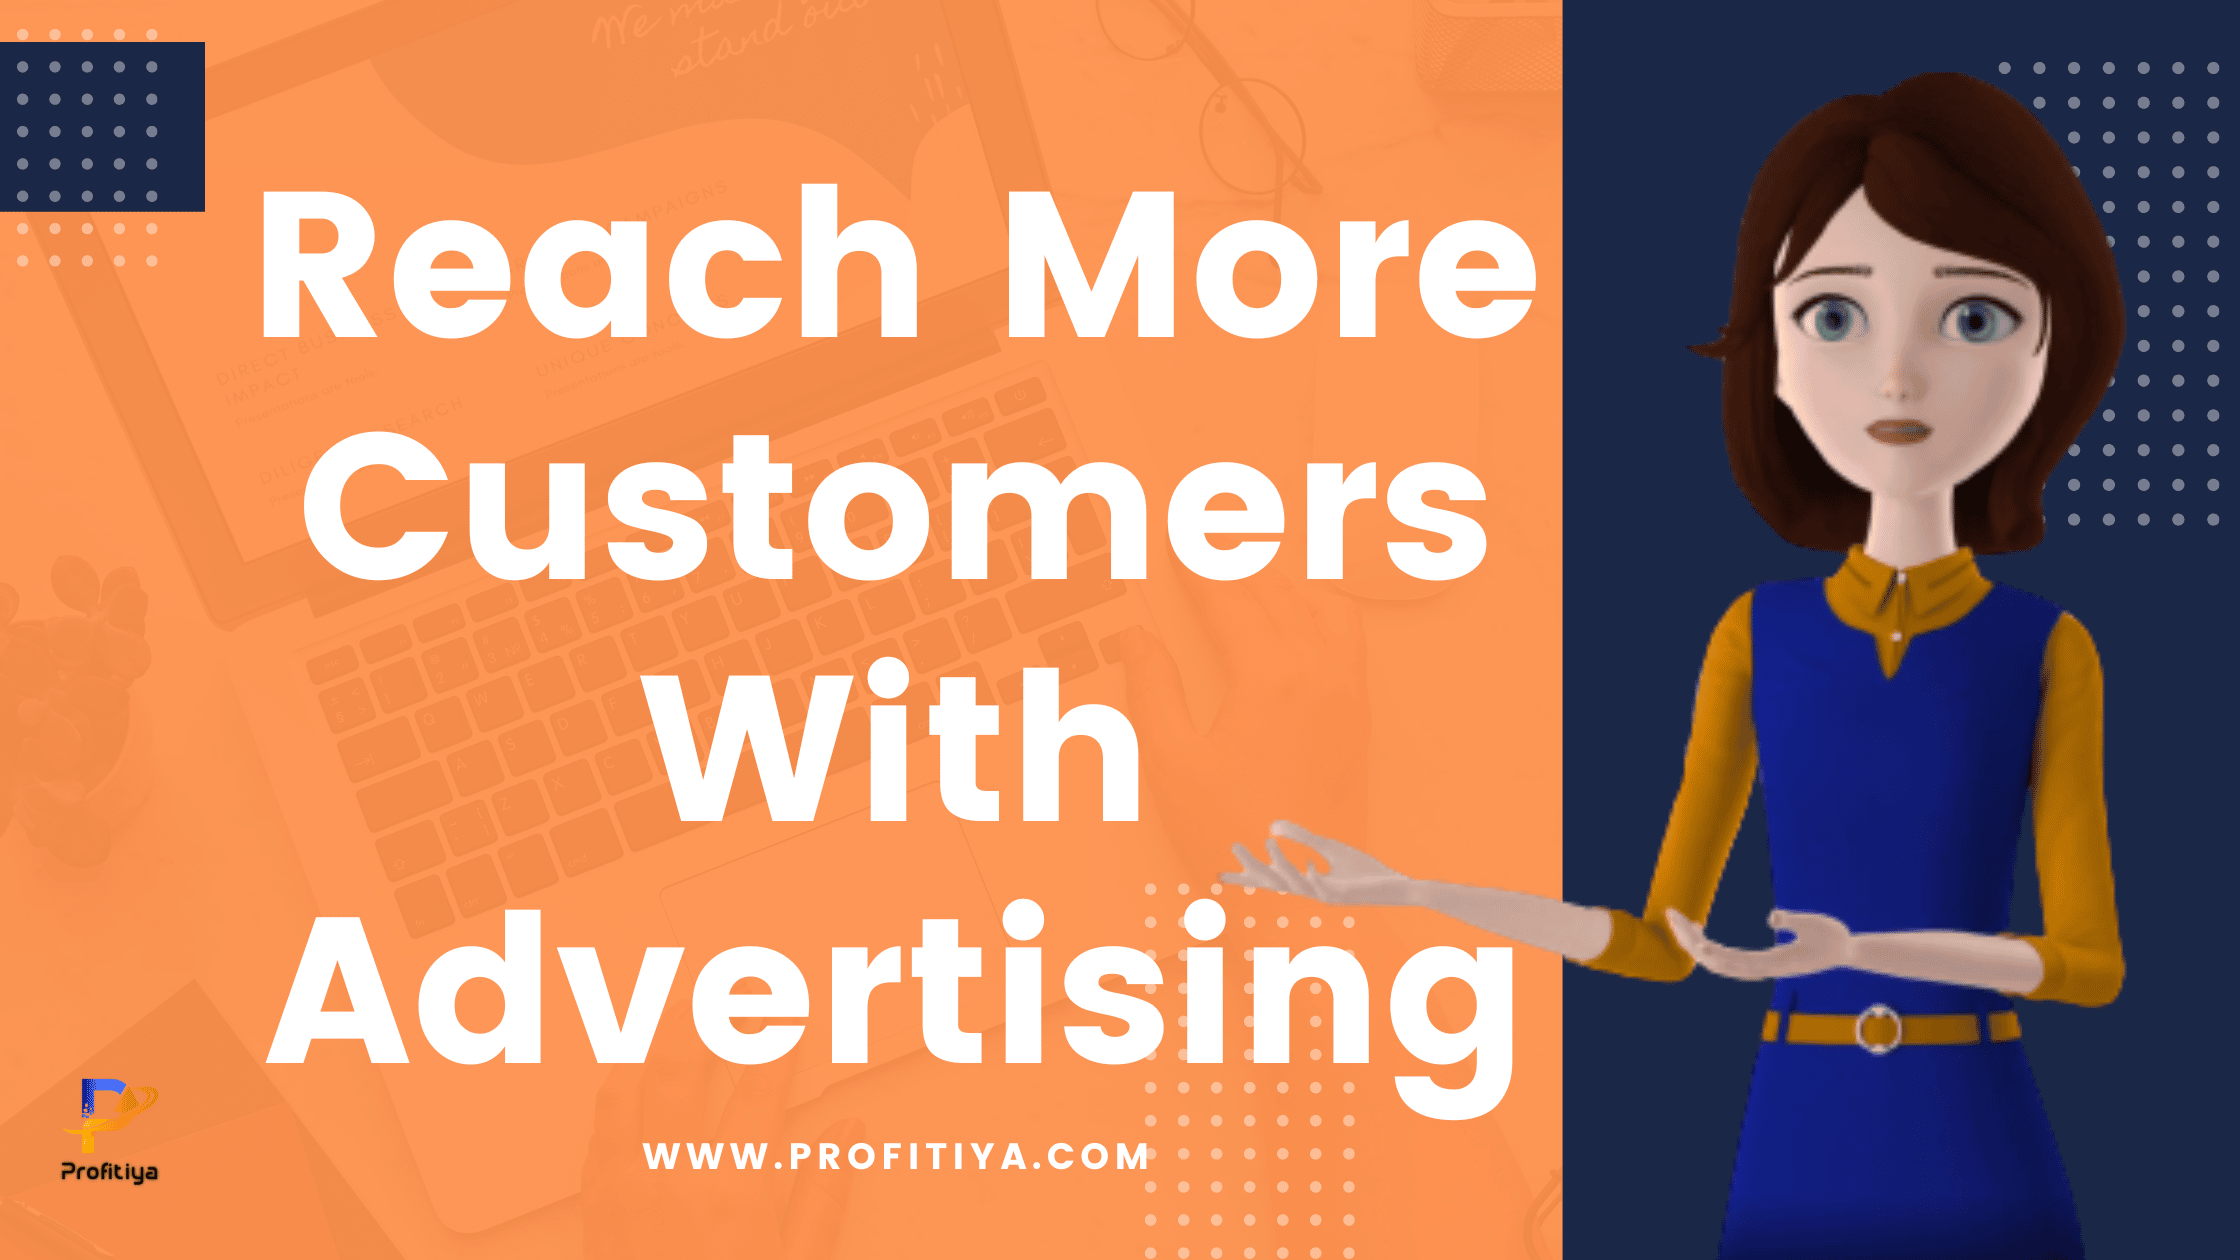 Reach More Customers With Advertising